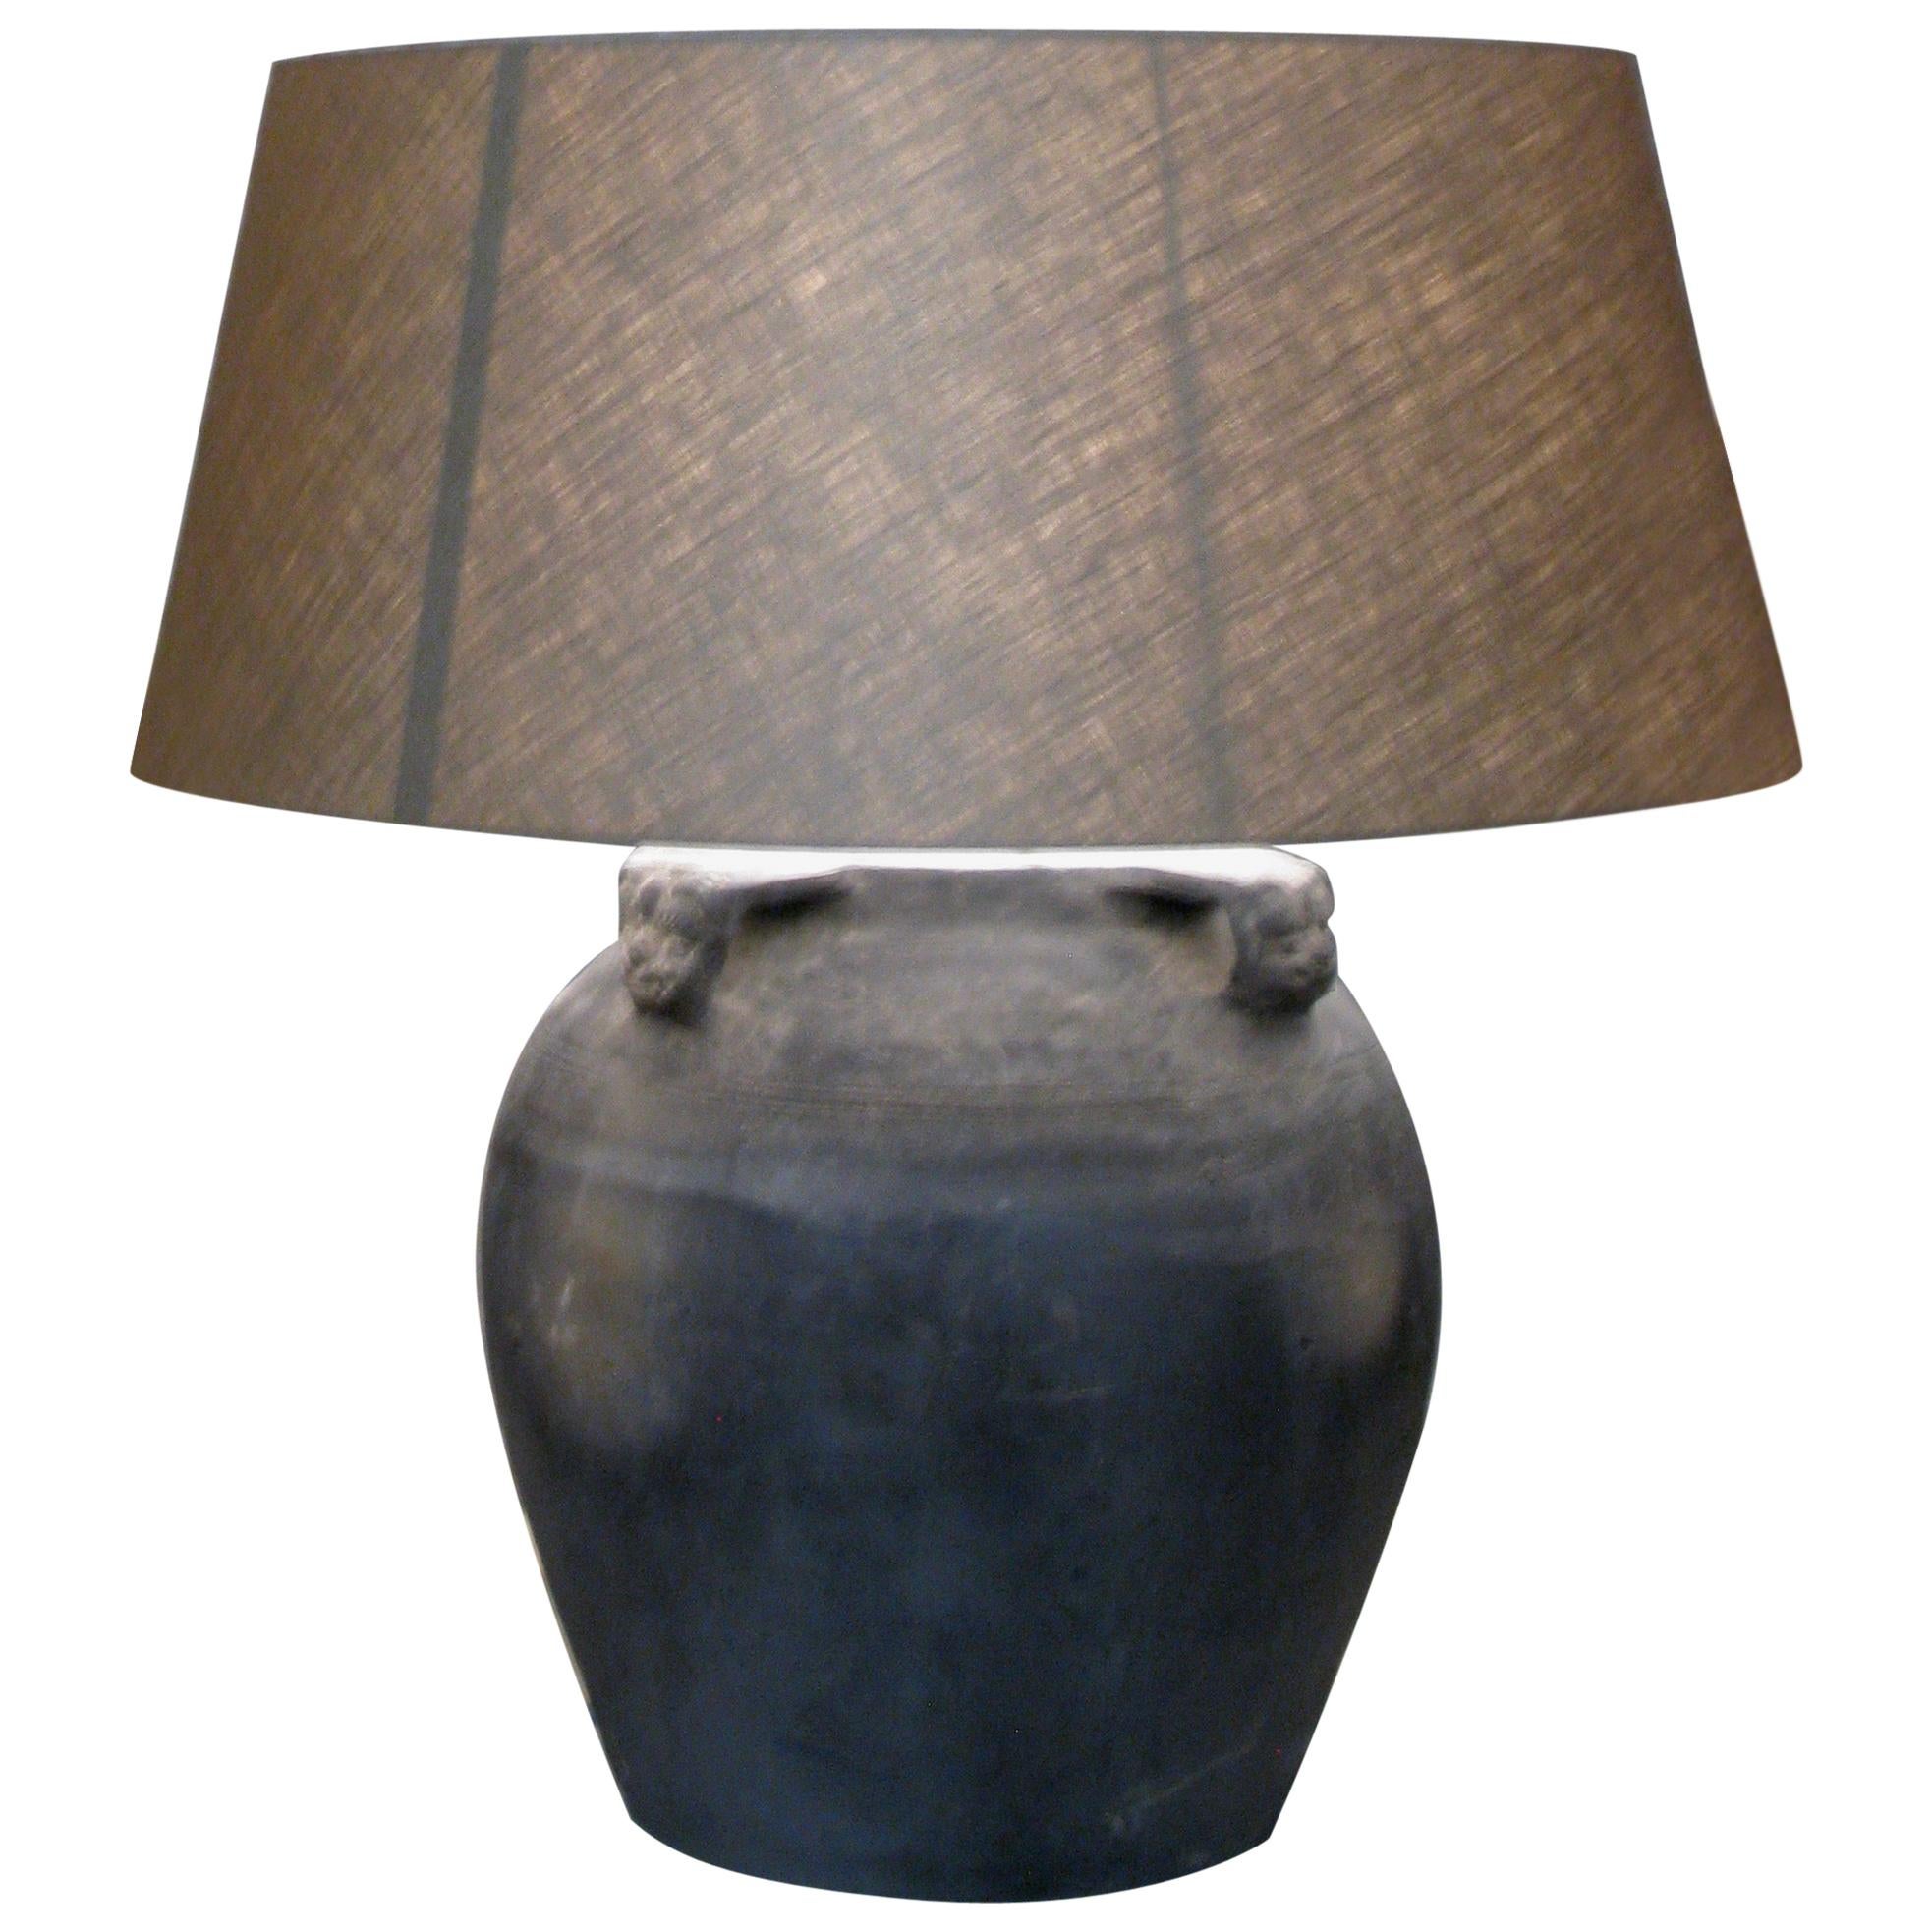 Old Clay Pot, lamp, lamp with linen shade